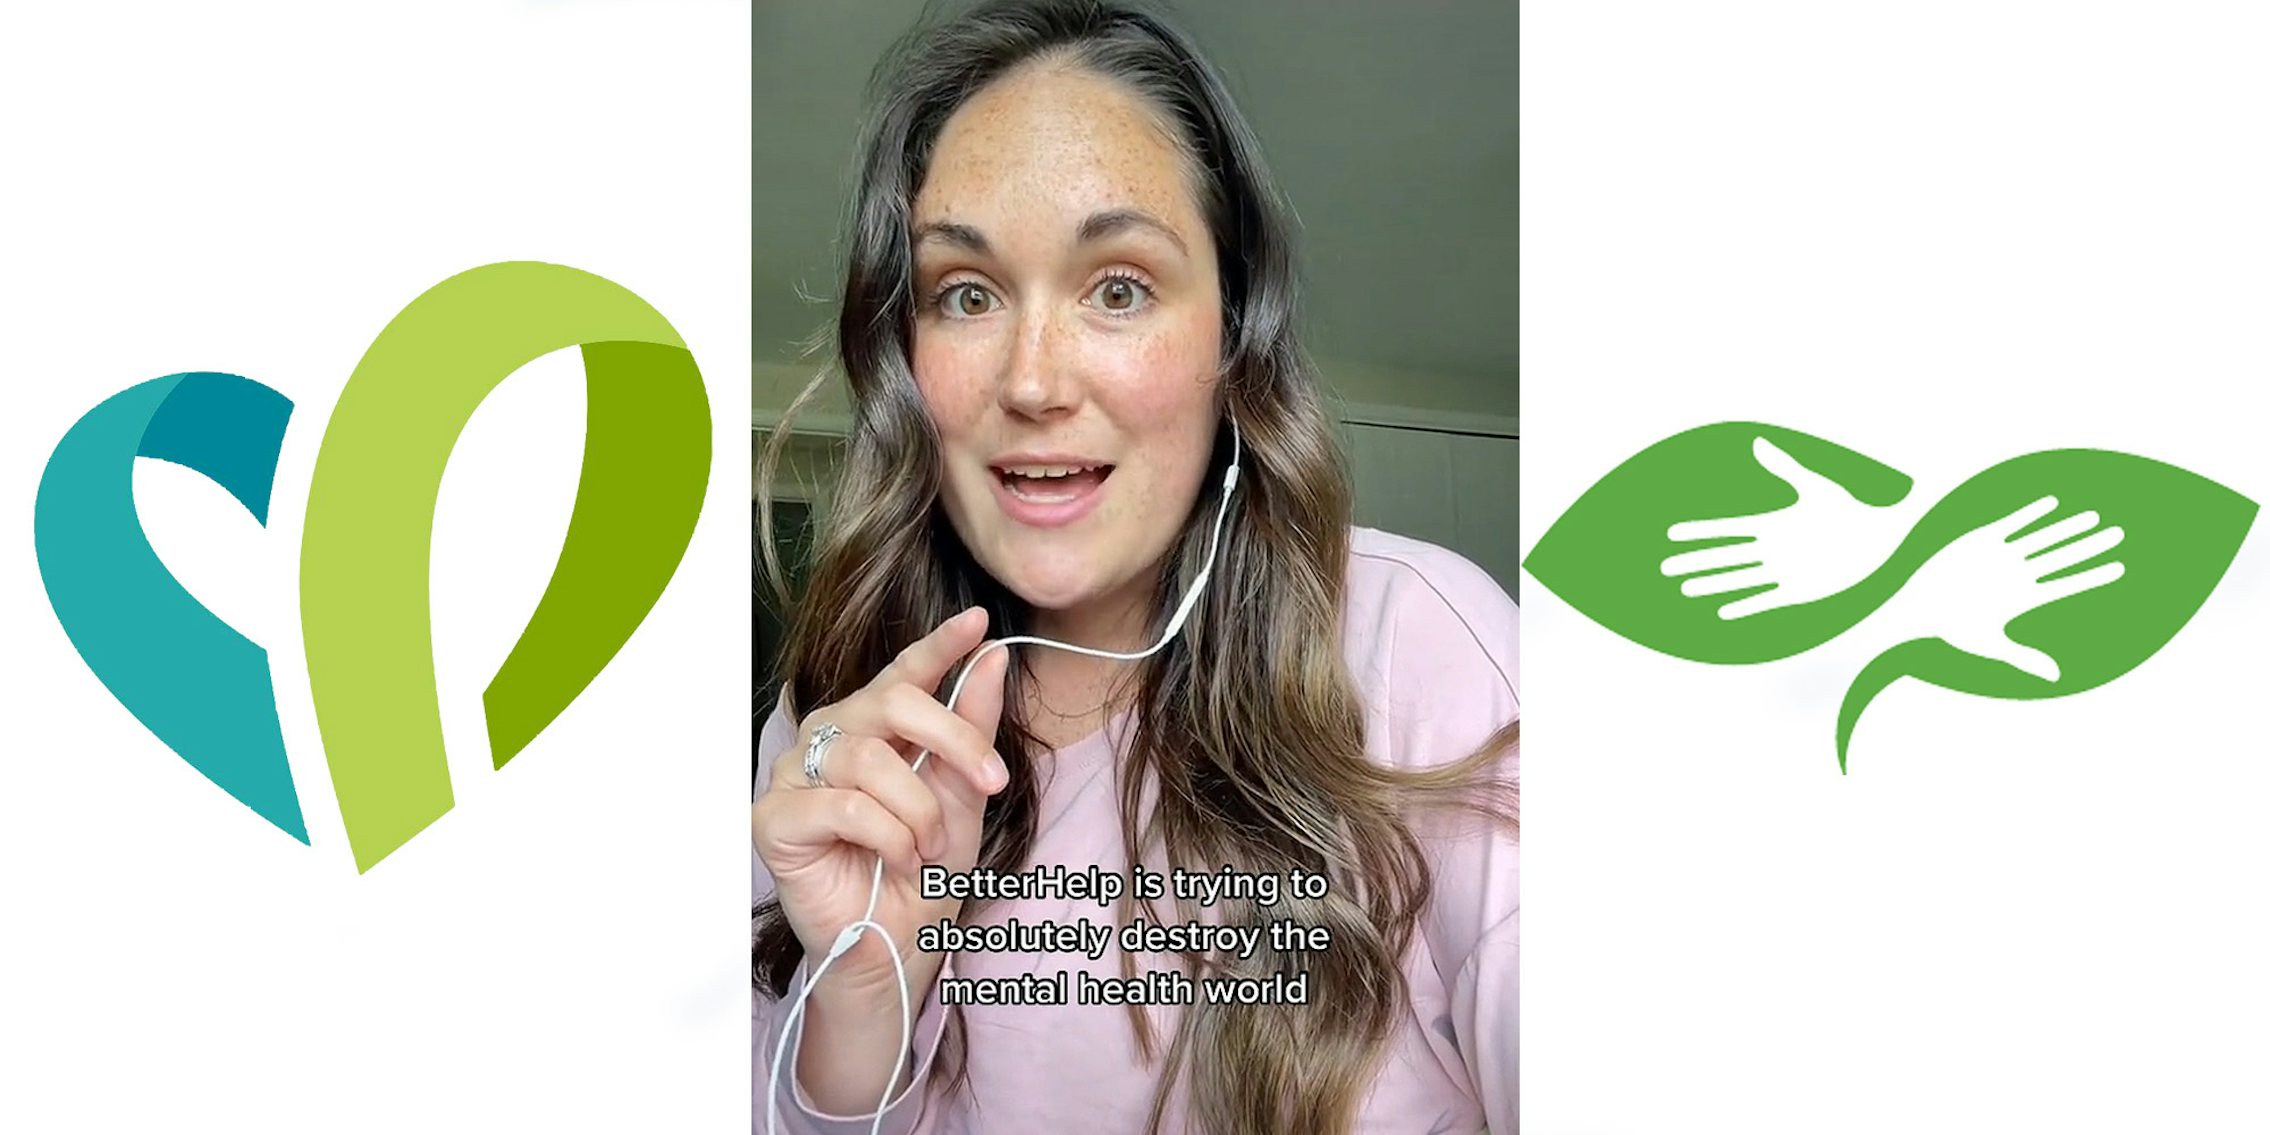 CareDash logo on white background (c) woman speaking into earbud microphone caption 'BetterHelp is trying to absolutely destroy the mental health world' (c) BetterHelp logo on white background (r)